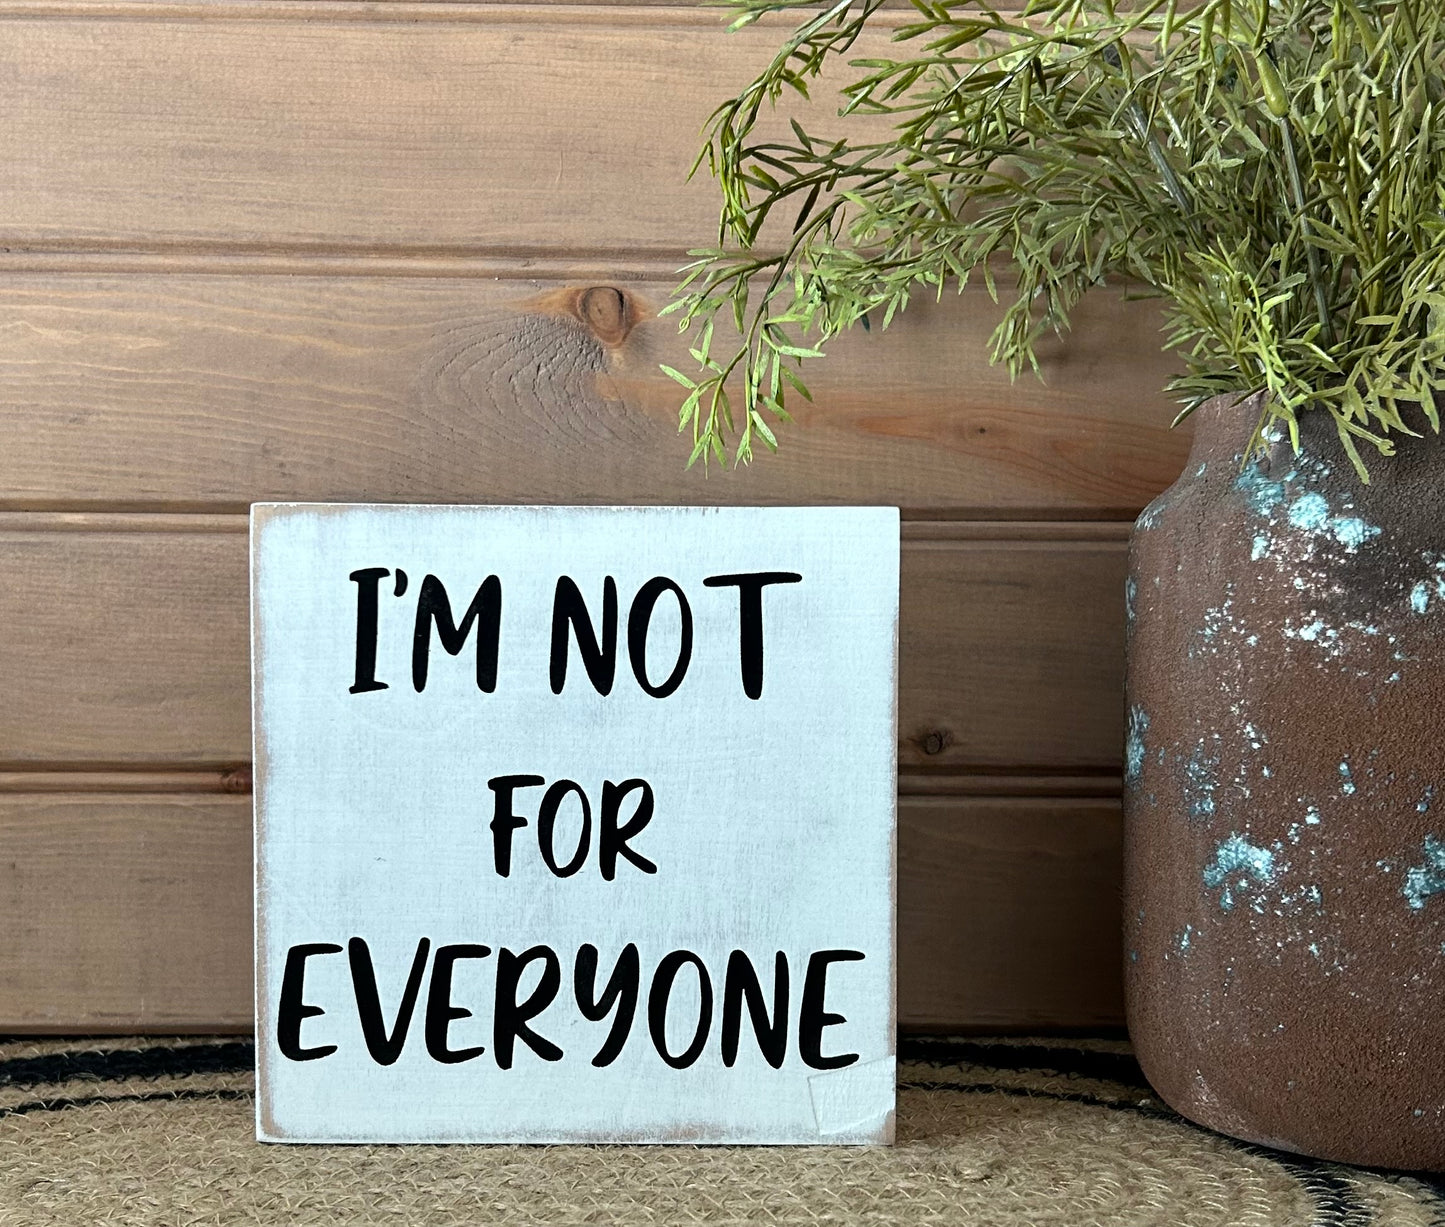 I’m Not For Everyone - Funny Rustic Shelf Sign